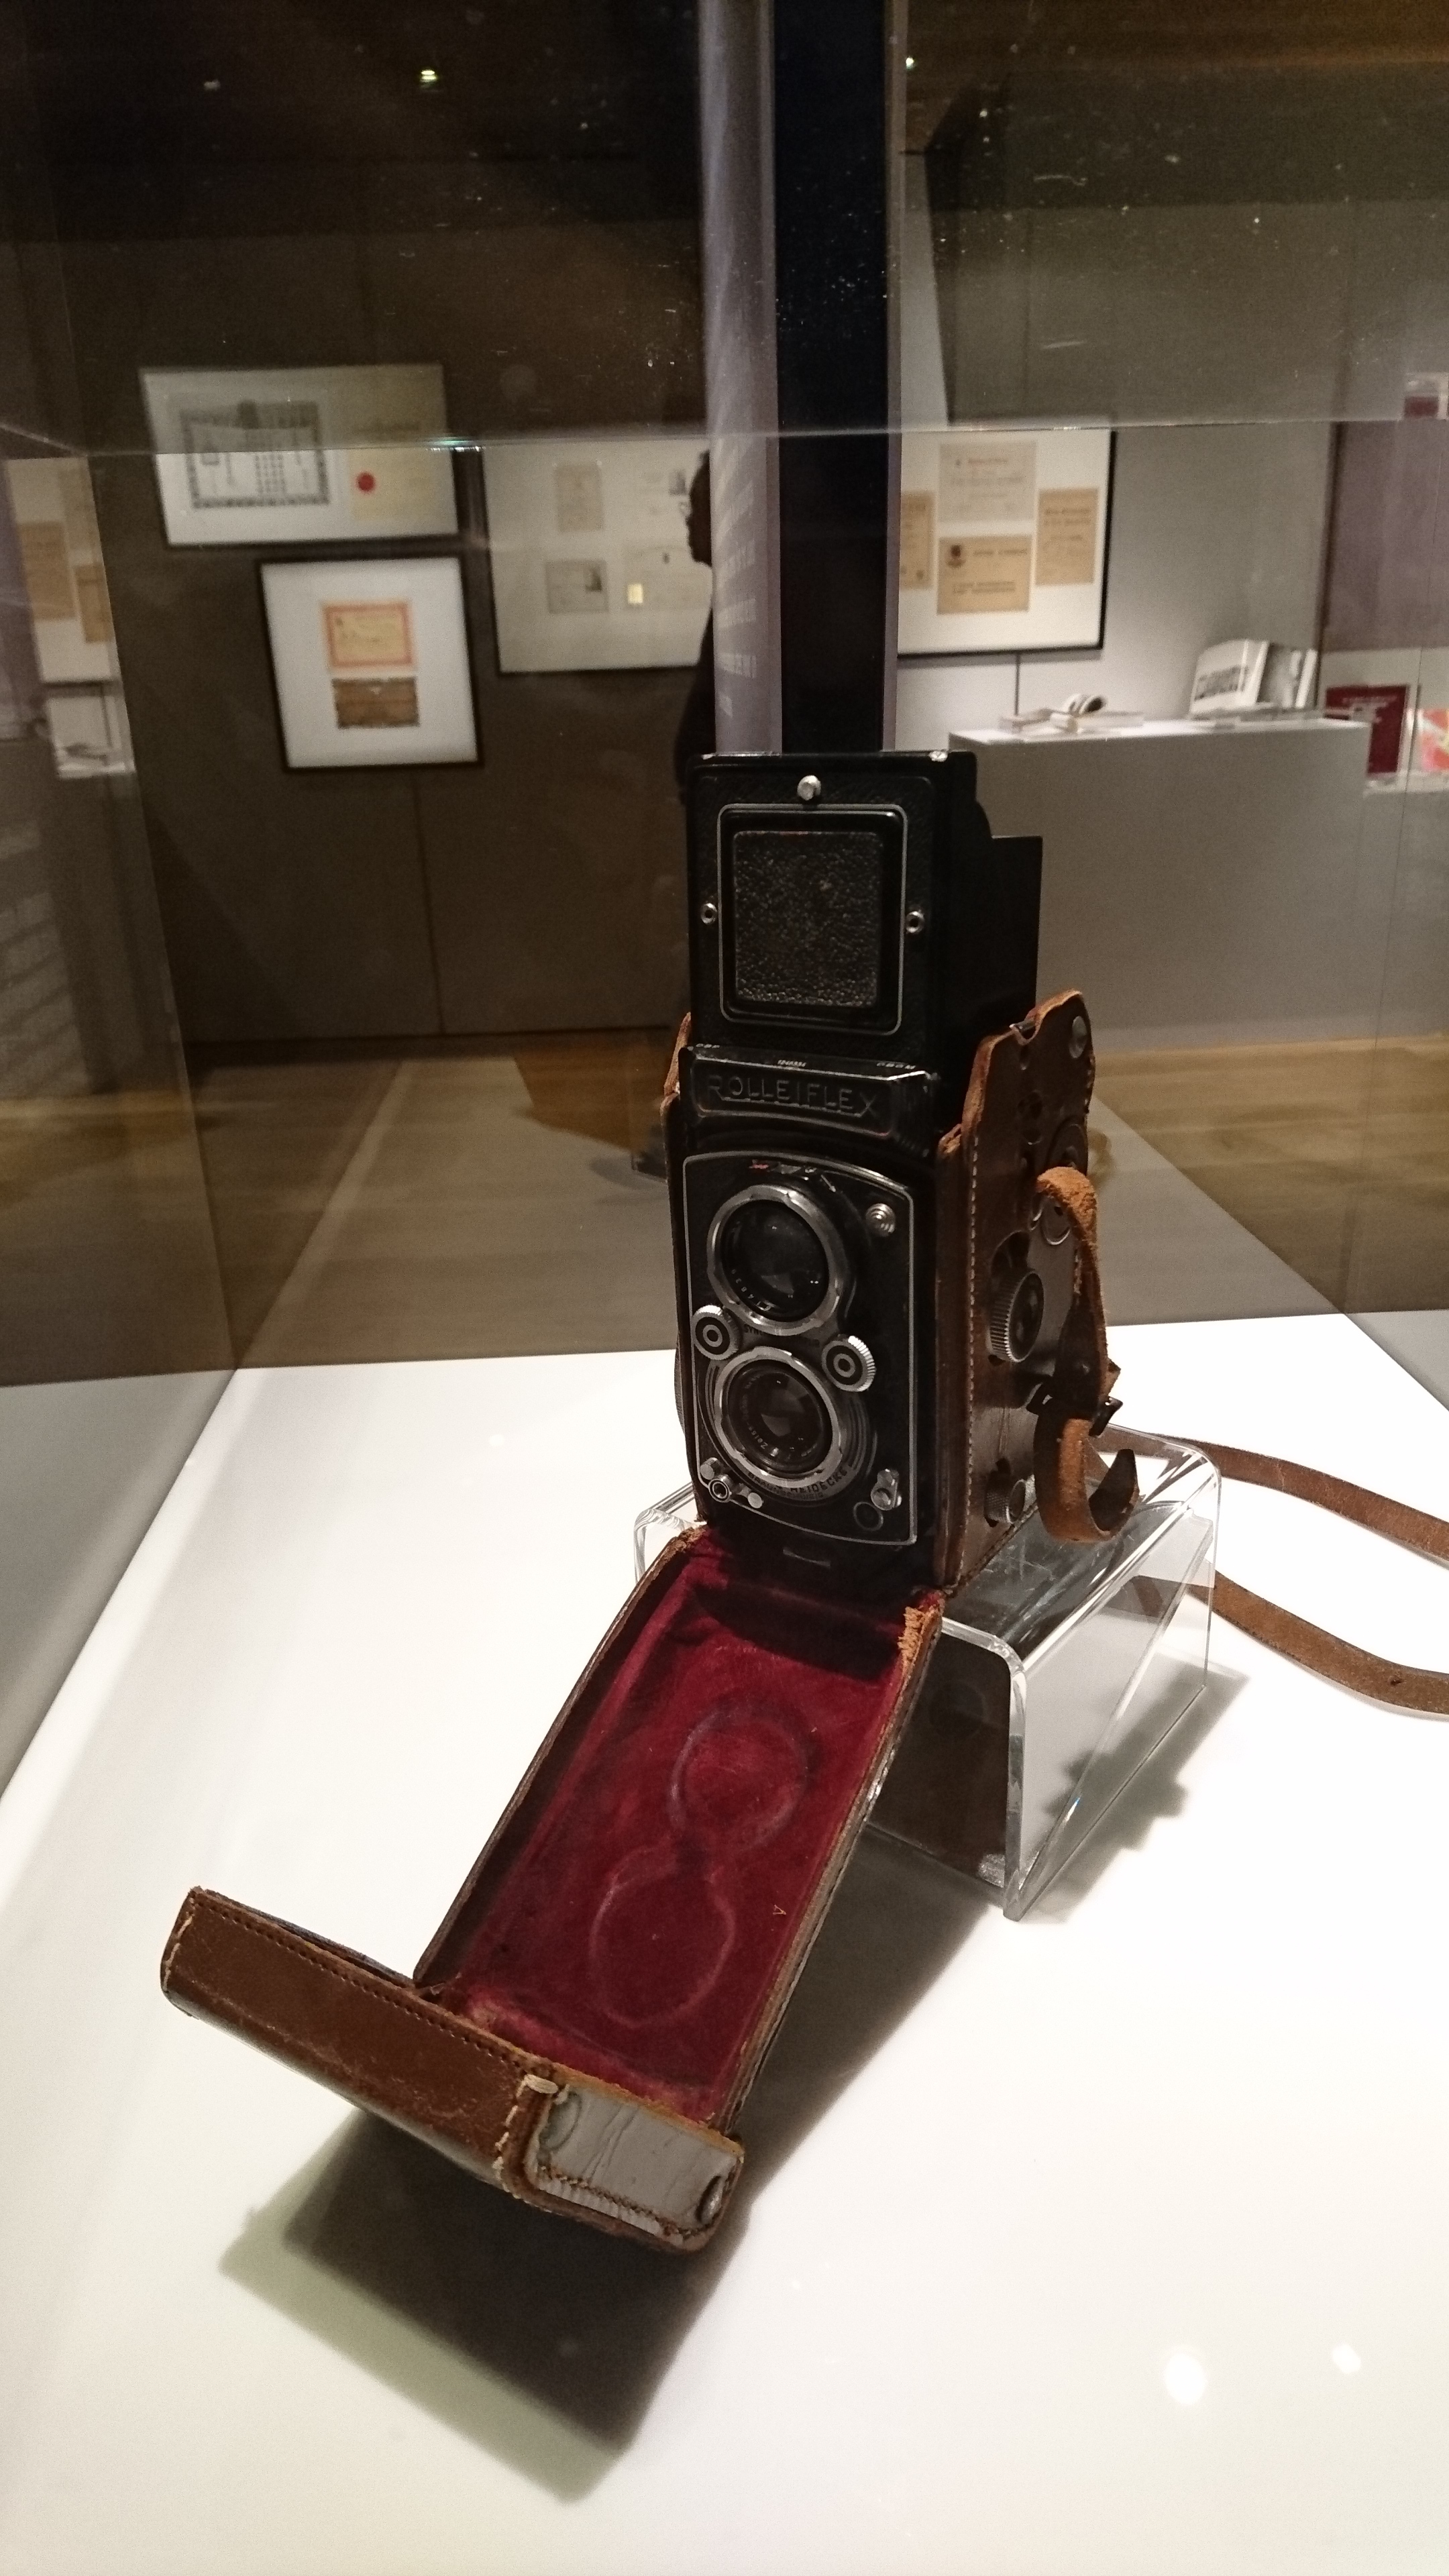 Rolleiflex camera used by Mr. Fan Ho for his award winning photographs